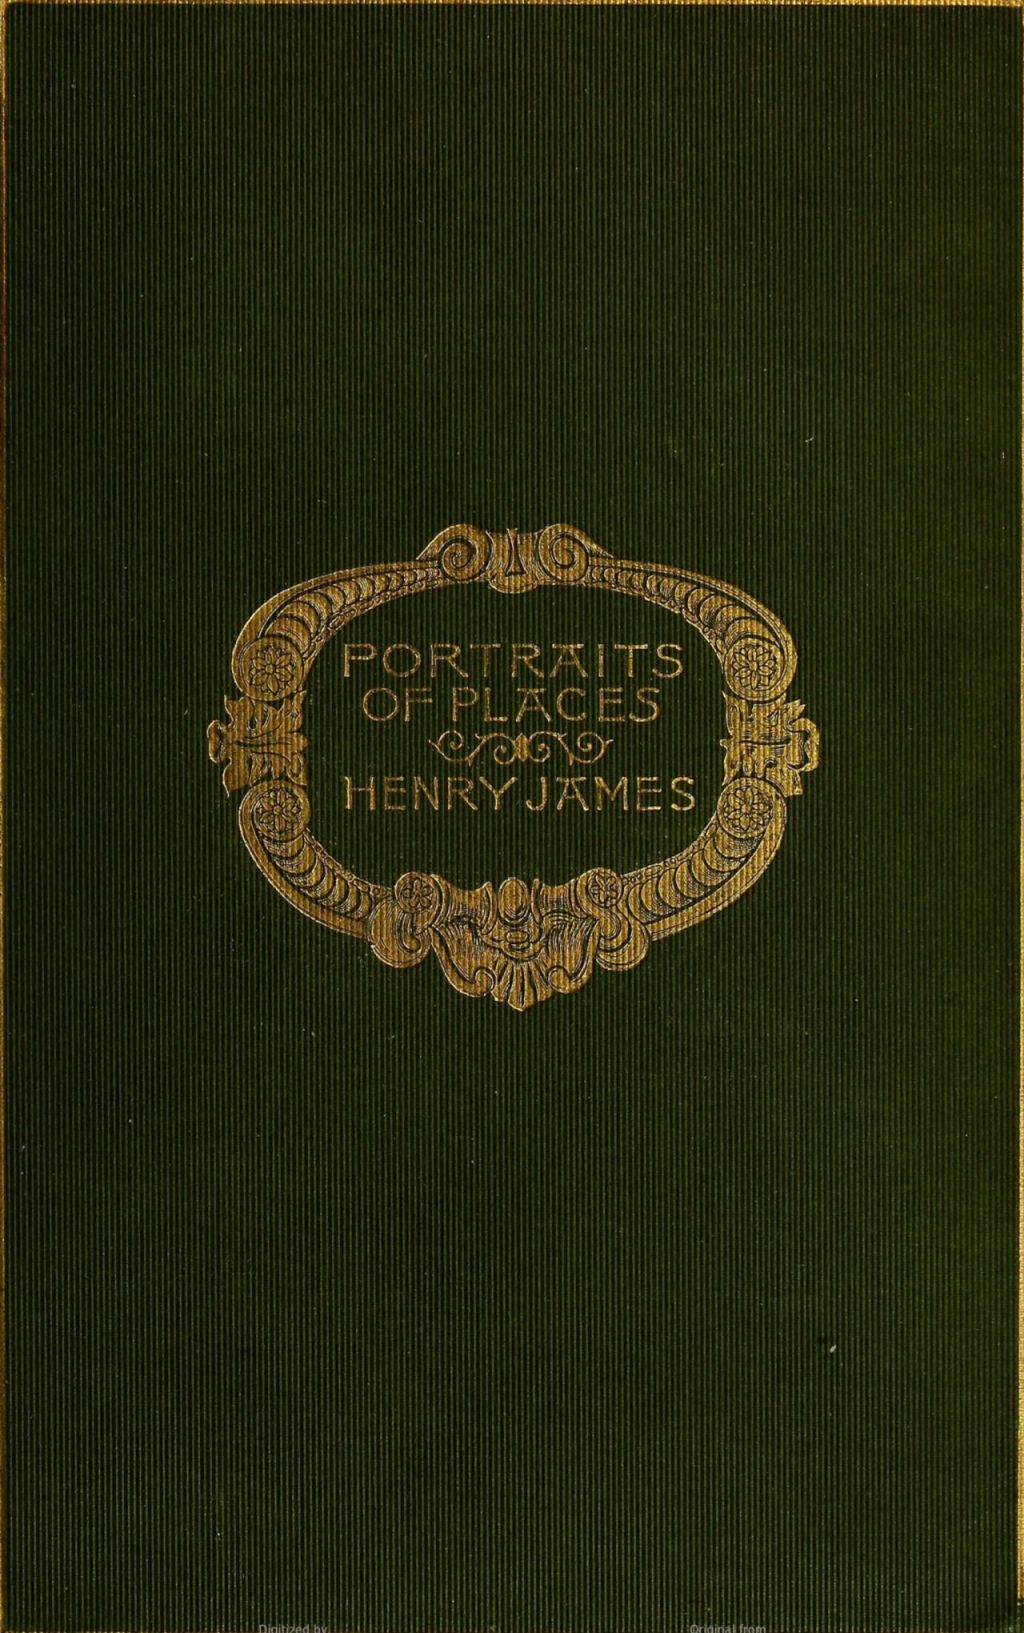 The Project Gutenberg eBook of Portraits of places, by Henry James.